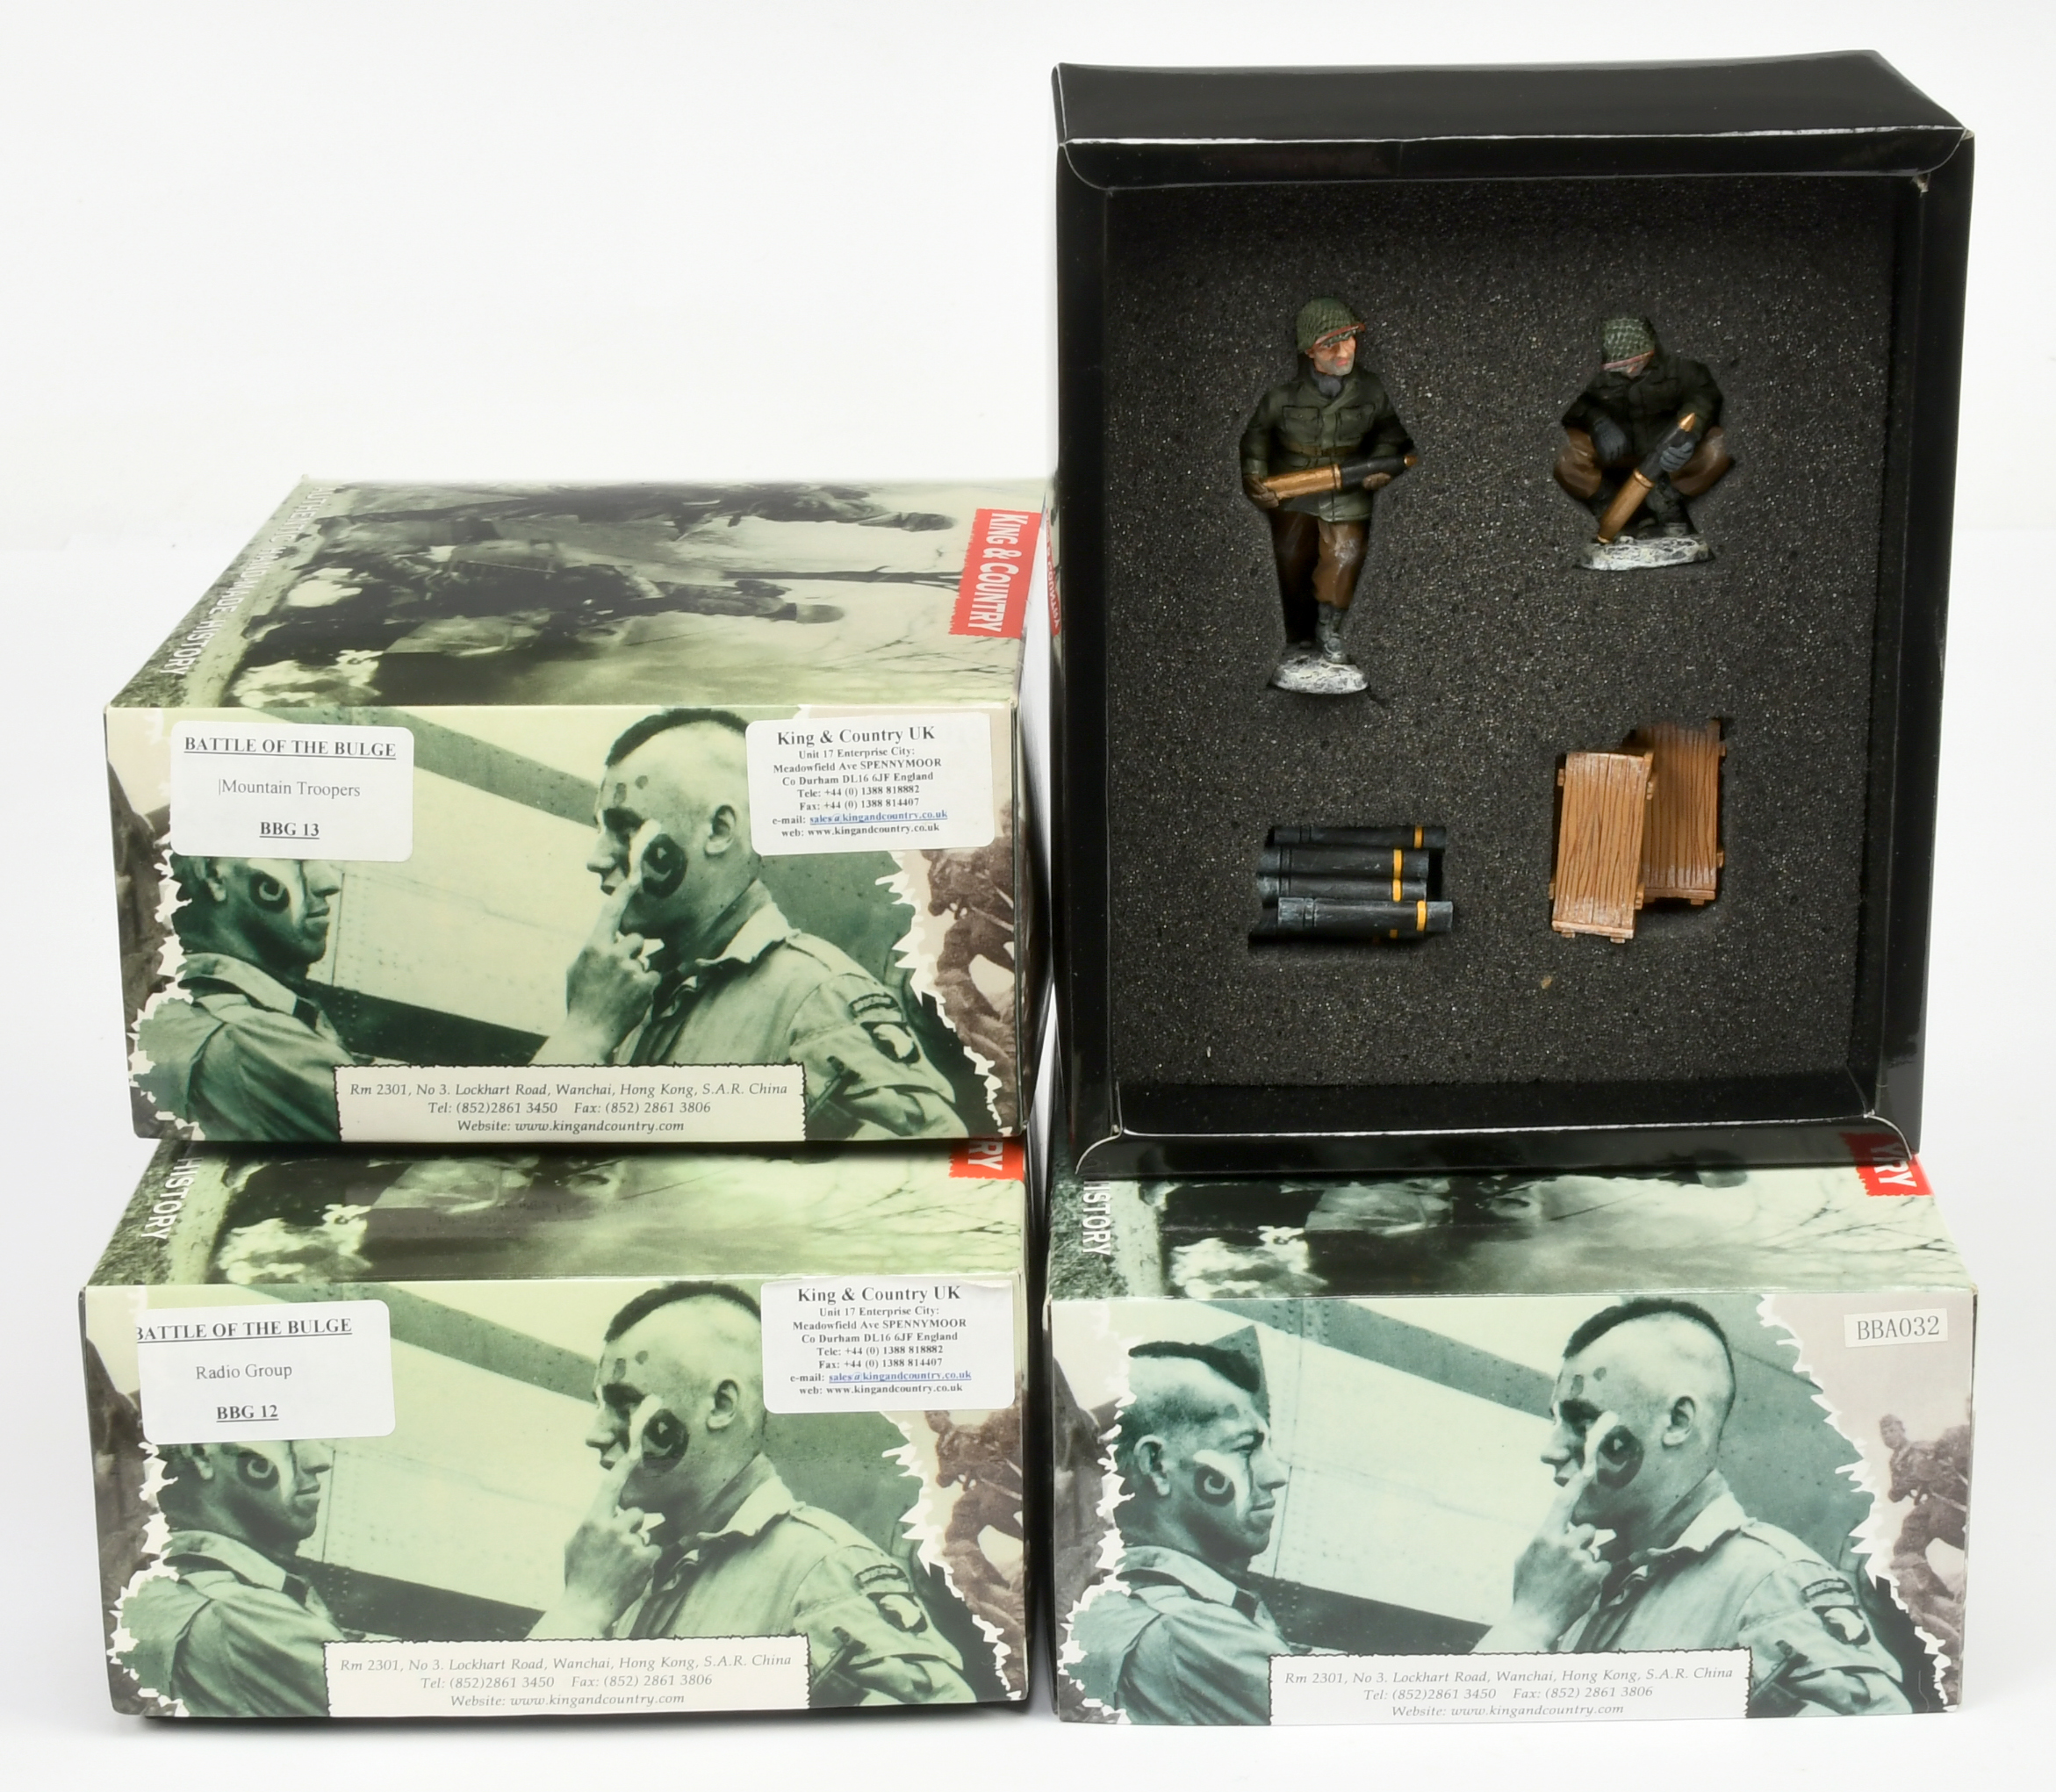 King & Country - Battle of the Bulge Figurine Sets x3